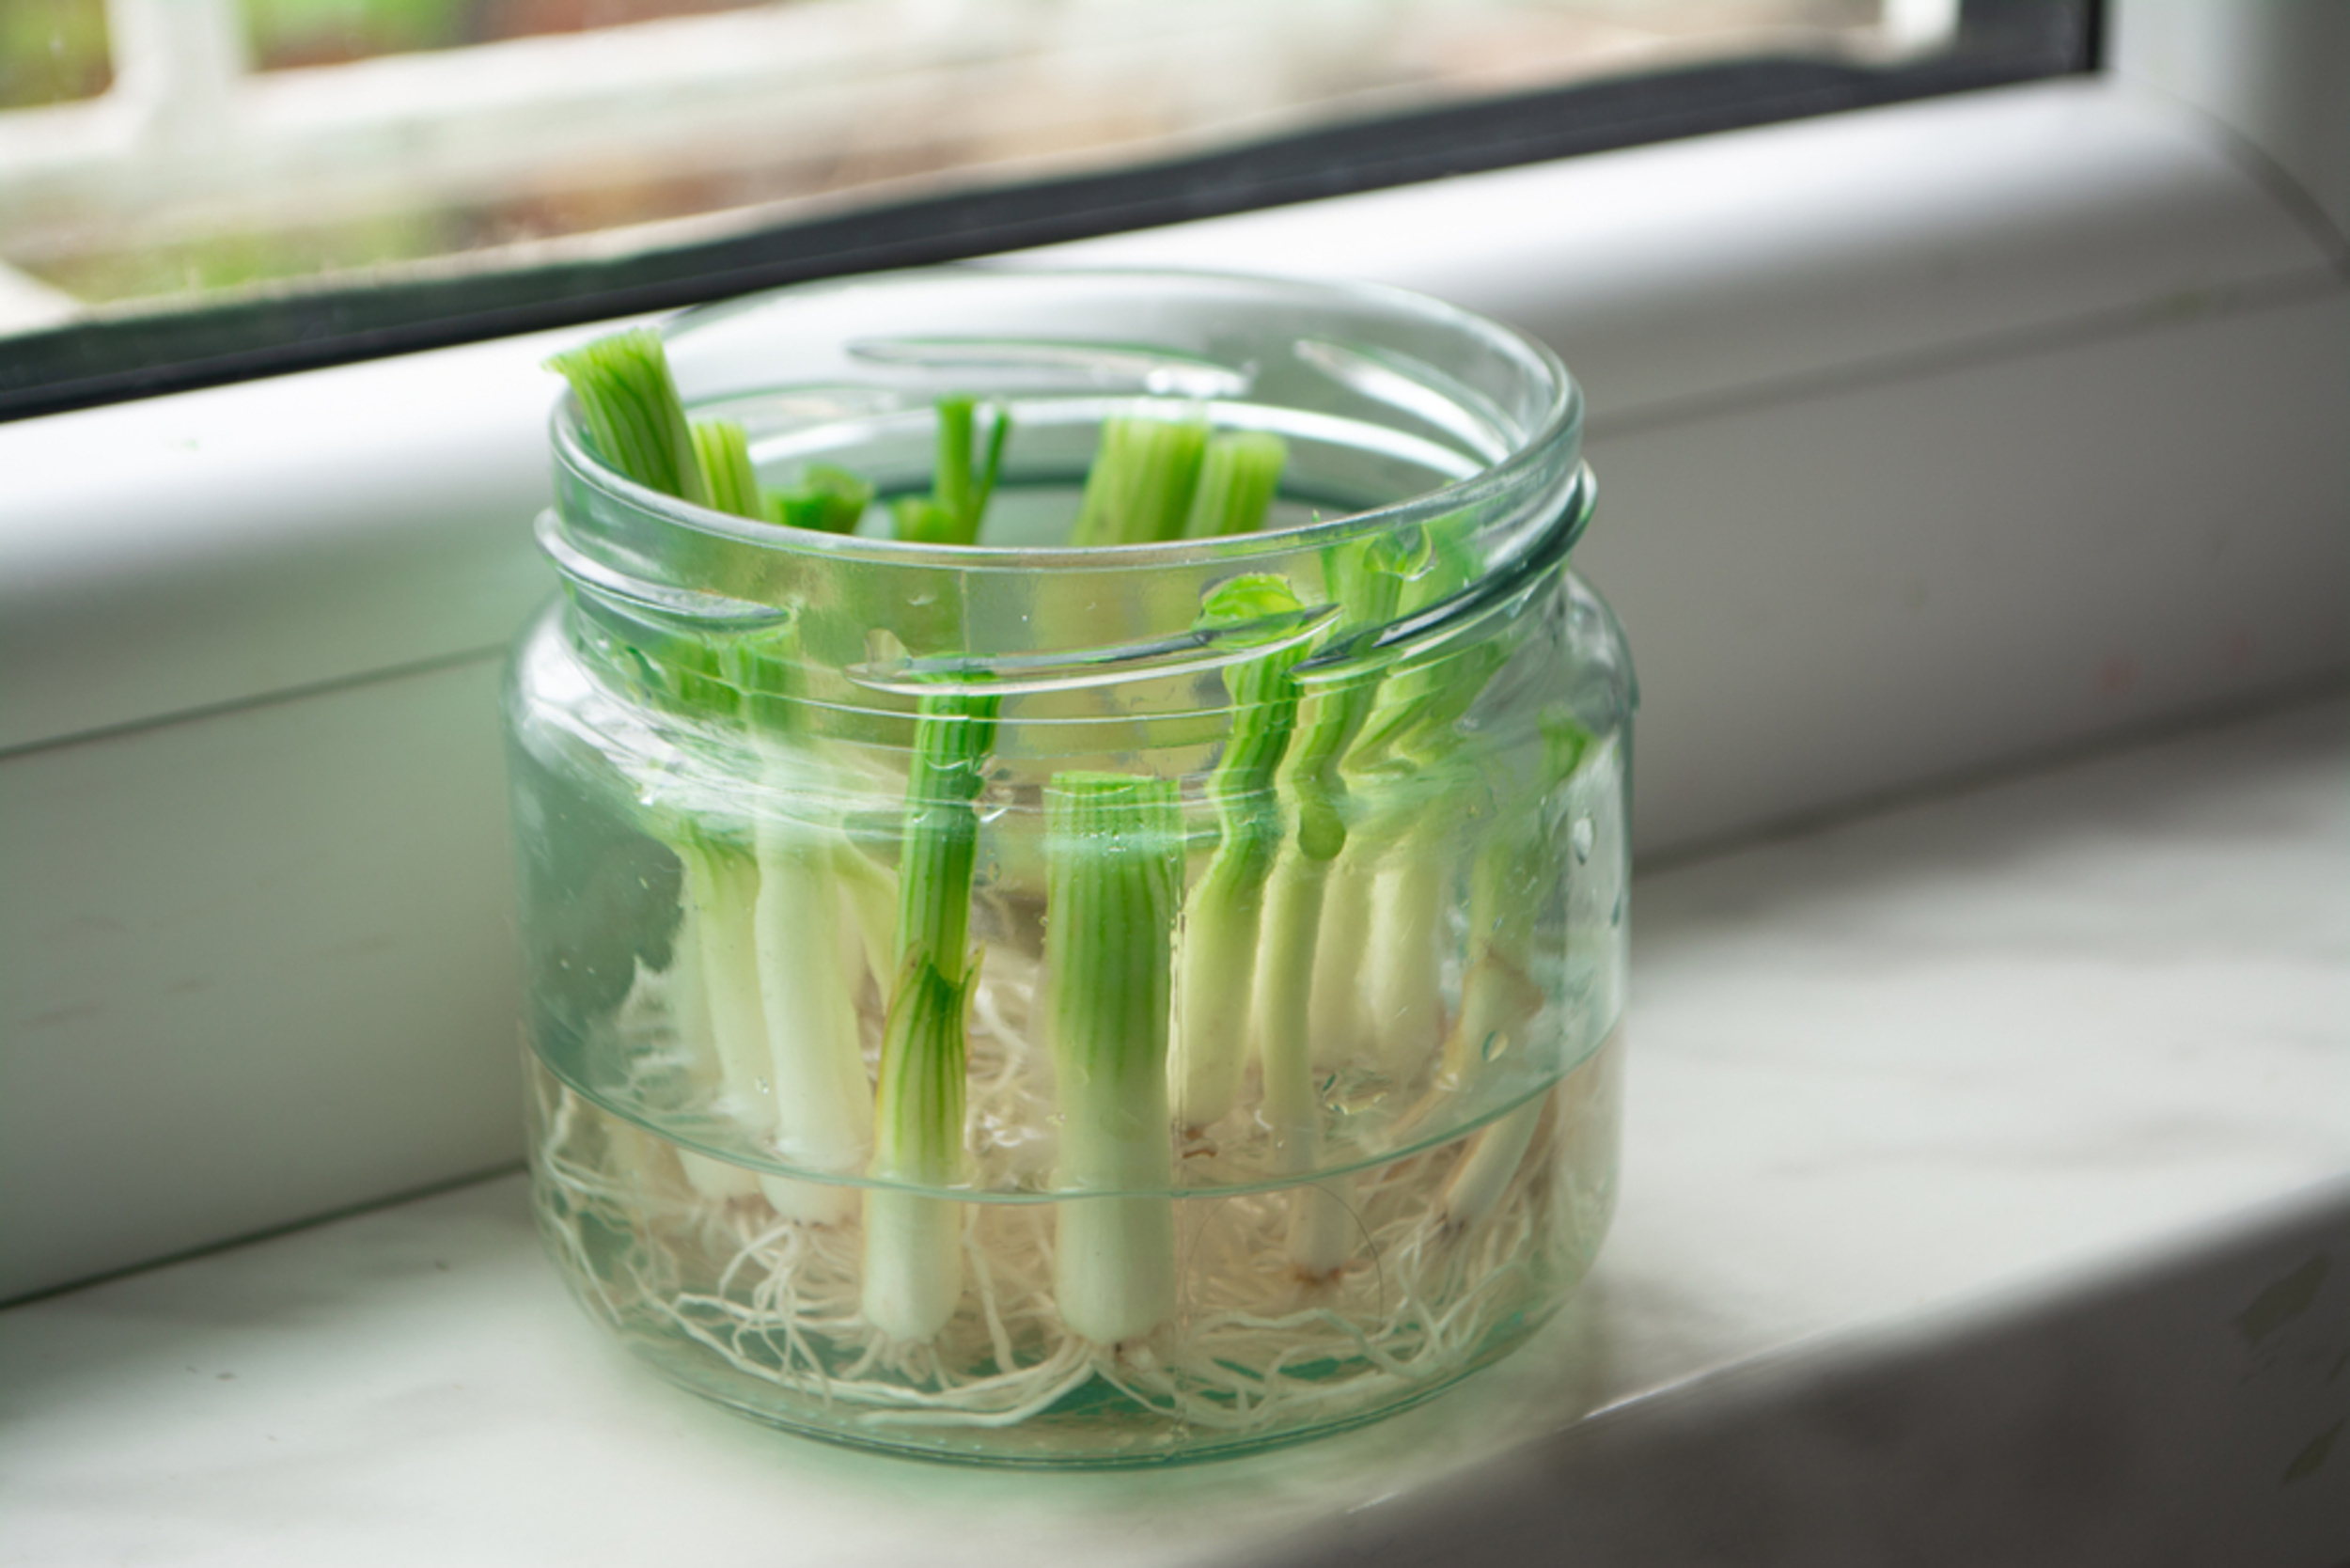 <p>Once you've chopped green onions (or scallions) for your salad, keep the ends in a glass jar of water. You'll have a whole new batch within a matter of days. Set the jar in a sunny windowsill for maximum growth. </p><p><a href='https://www.msn.com/en-us/community/channel/vid-cj9pqbr0vn9in2b6ddcd8sfgpfq6x6utp44fssrv6mc2gtybw0us'>Follow us on MSN to see more of our exclusive lifestyle content.</a></p>